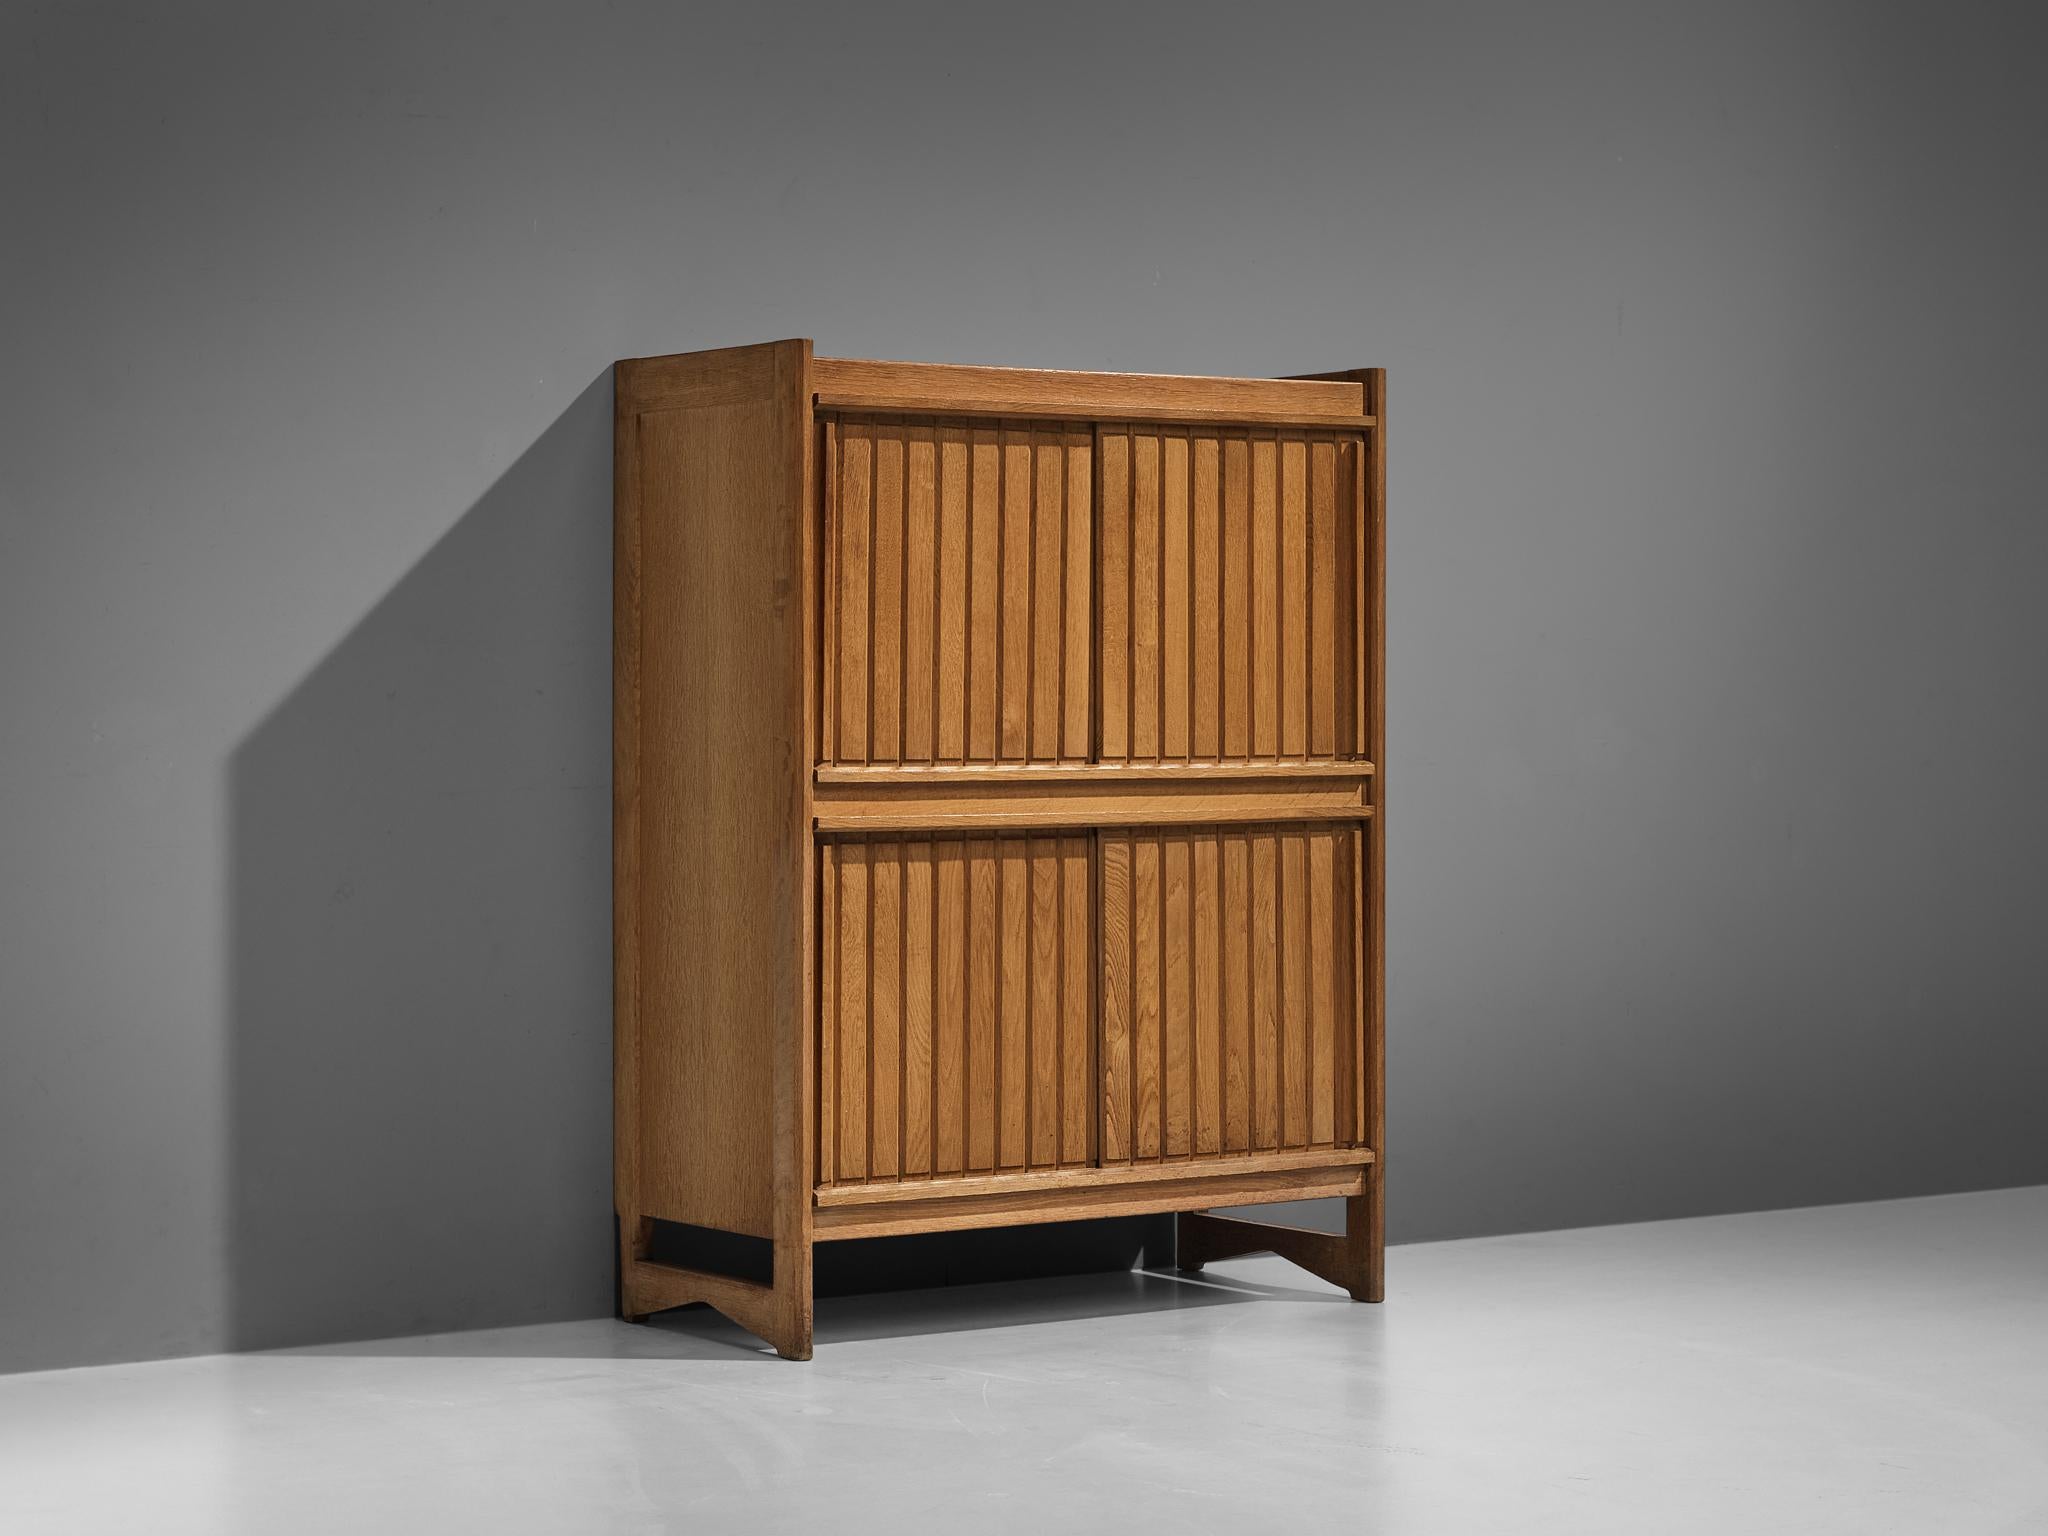 Guillerme et Chambron for Votre Maison, cabinet, oak, France, 1960s

This outstanding cabinet is based on a well-designed structure where aesthetics and functionally come hand in hand. The front holds the characteristics of the French designer duo